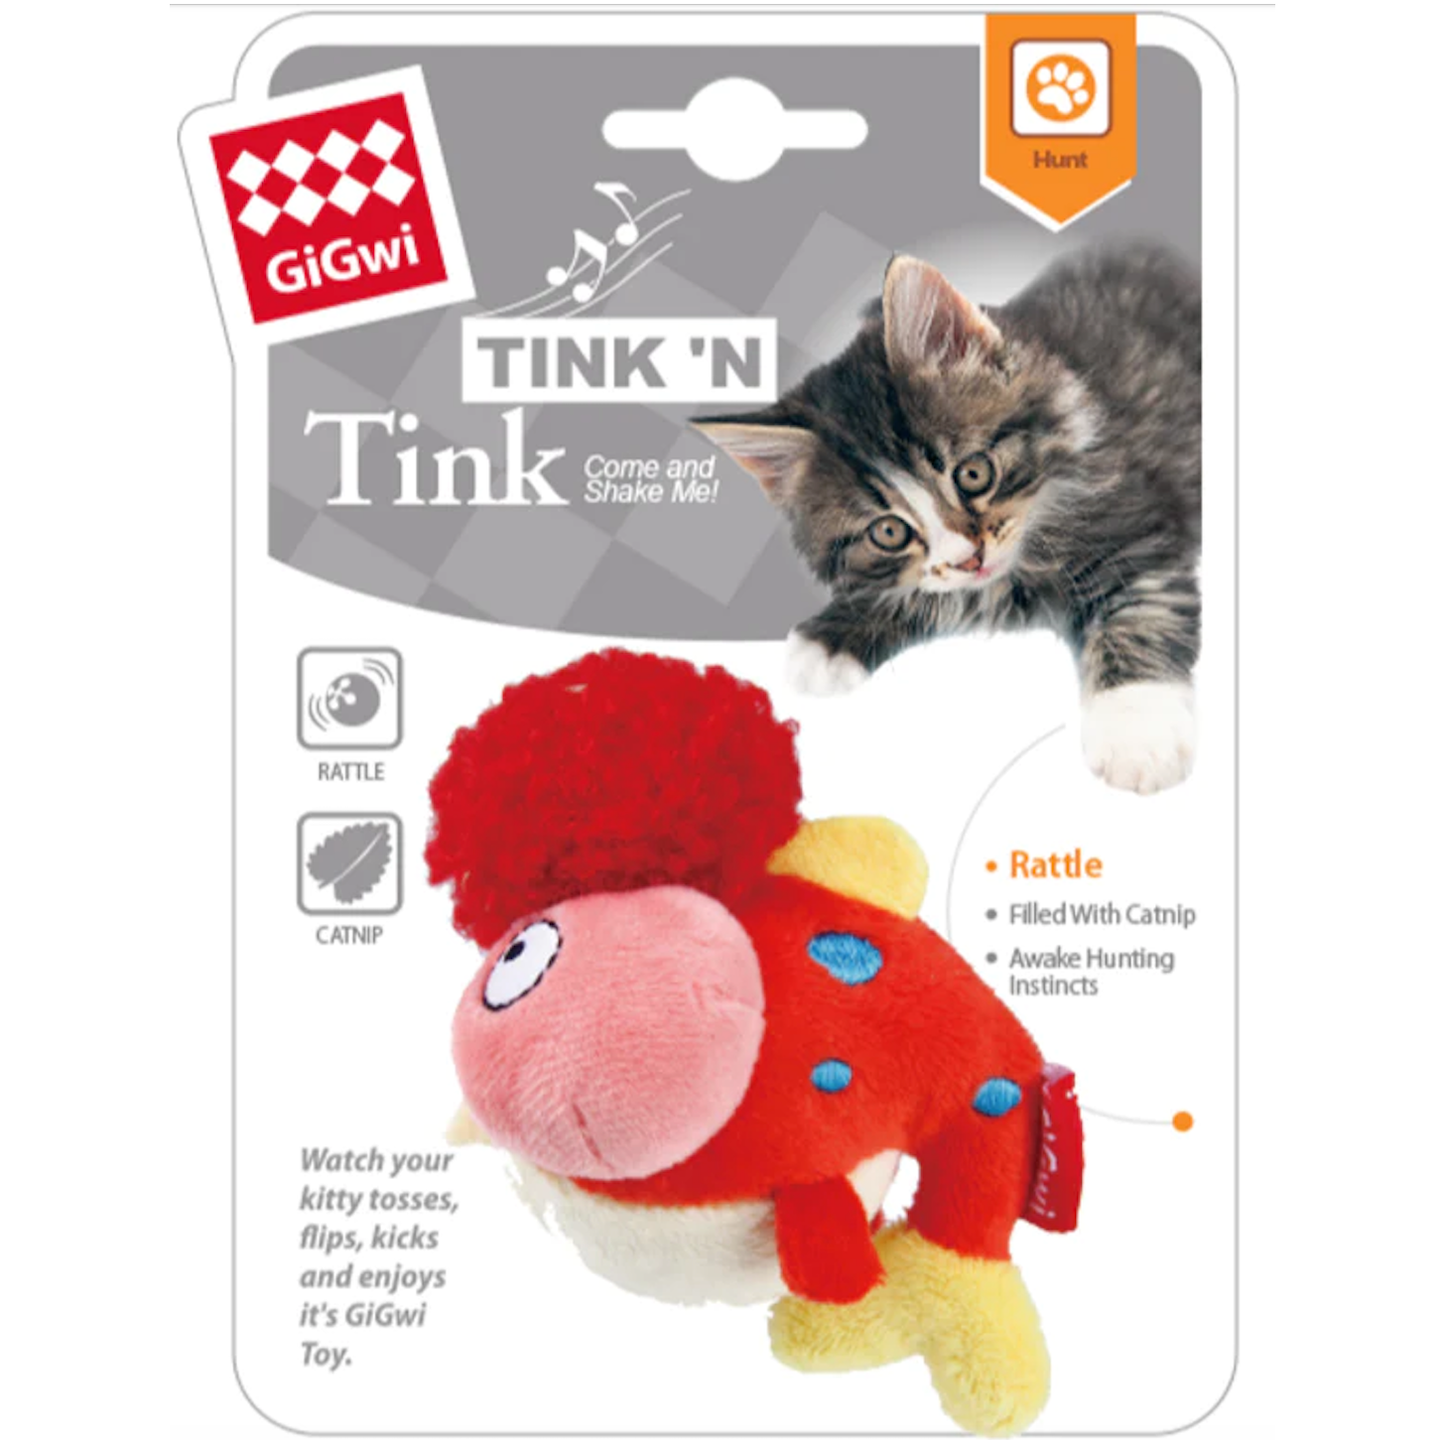 GIGWI TINK 'N TINK CAT TOY